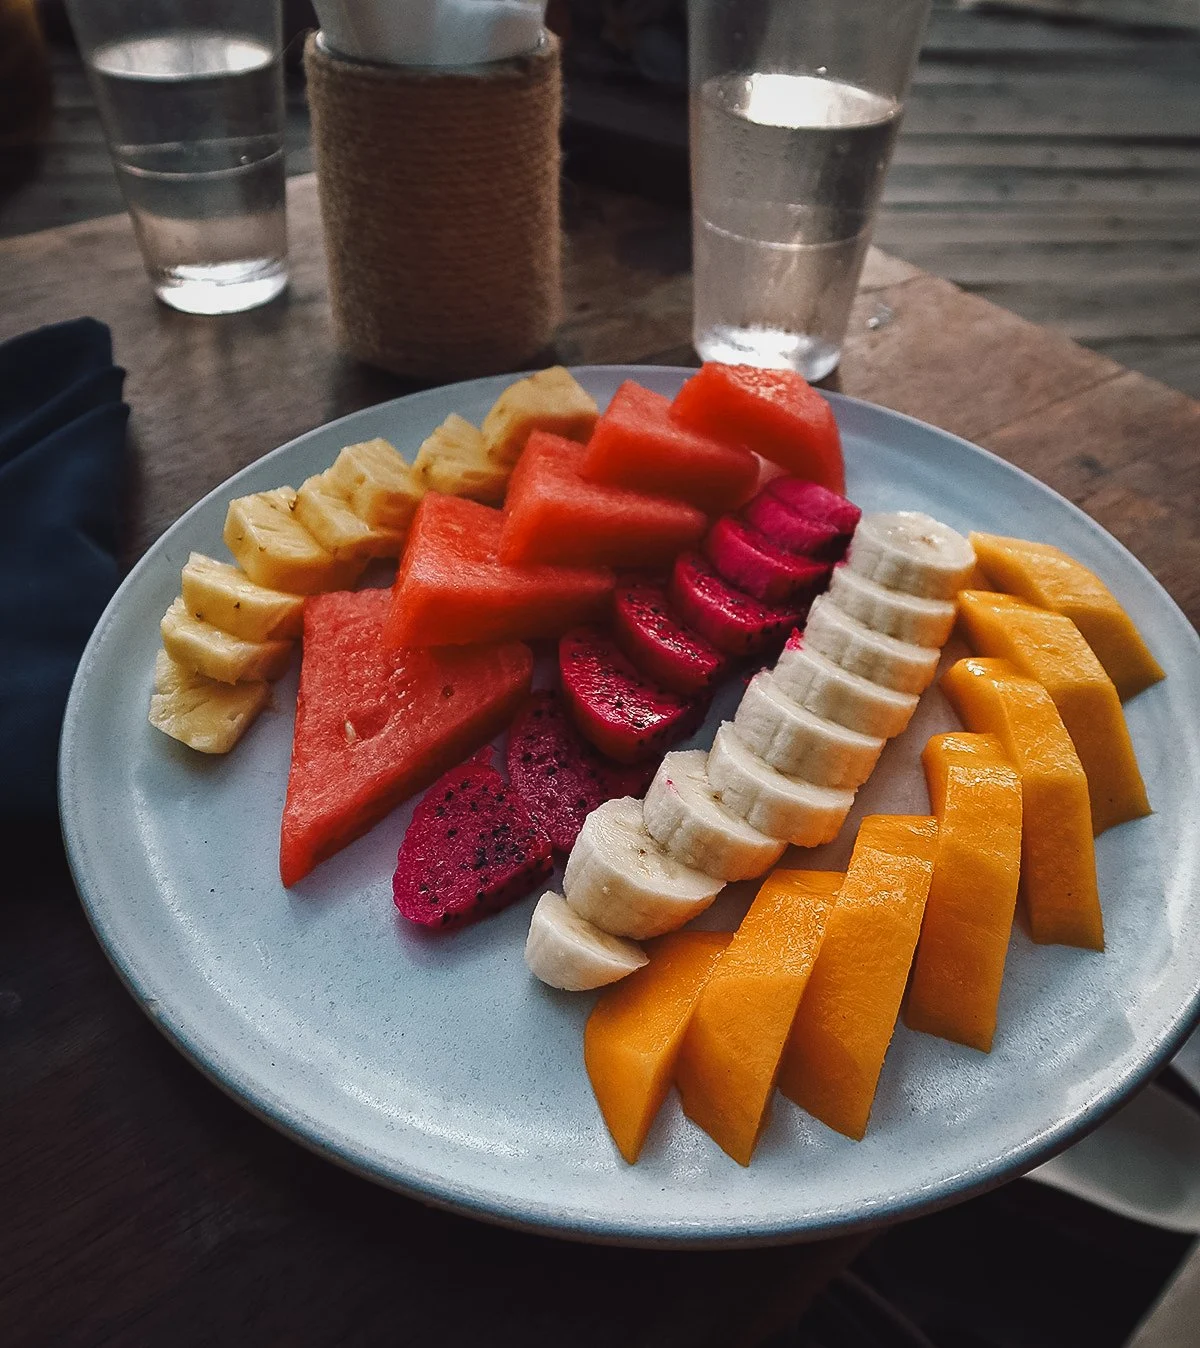 Fruit plate at a restaurant in Canggu